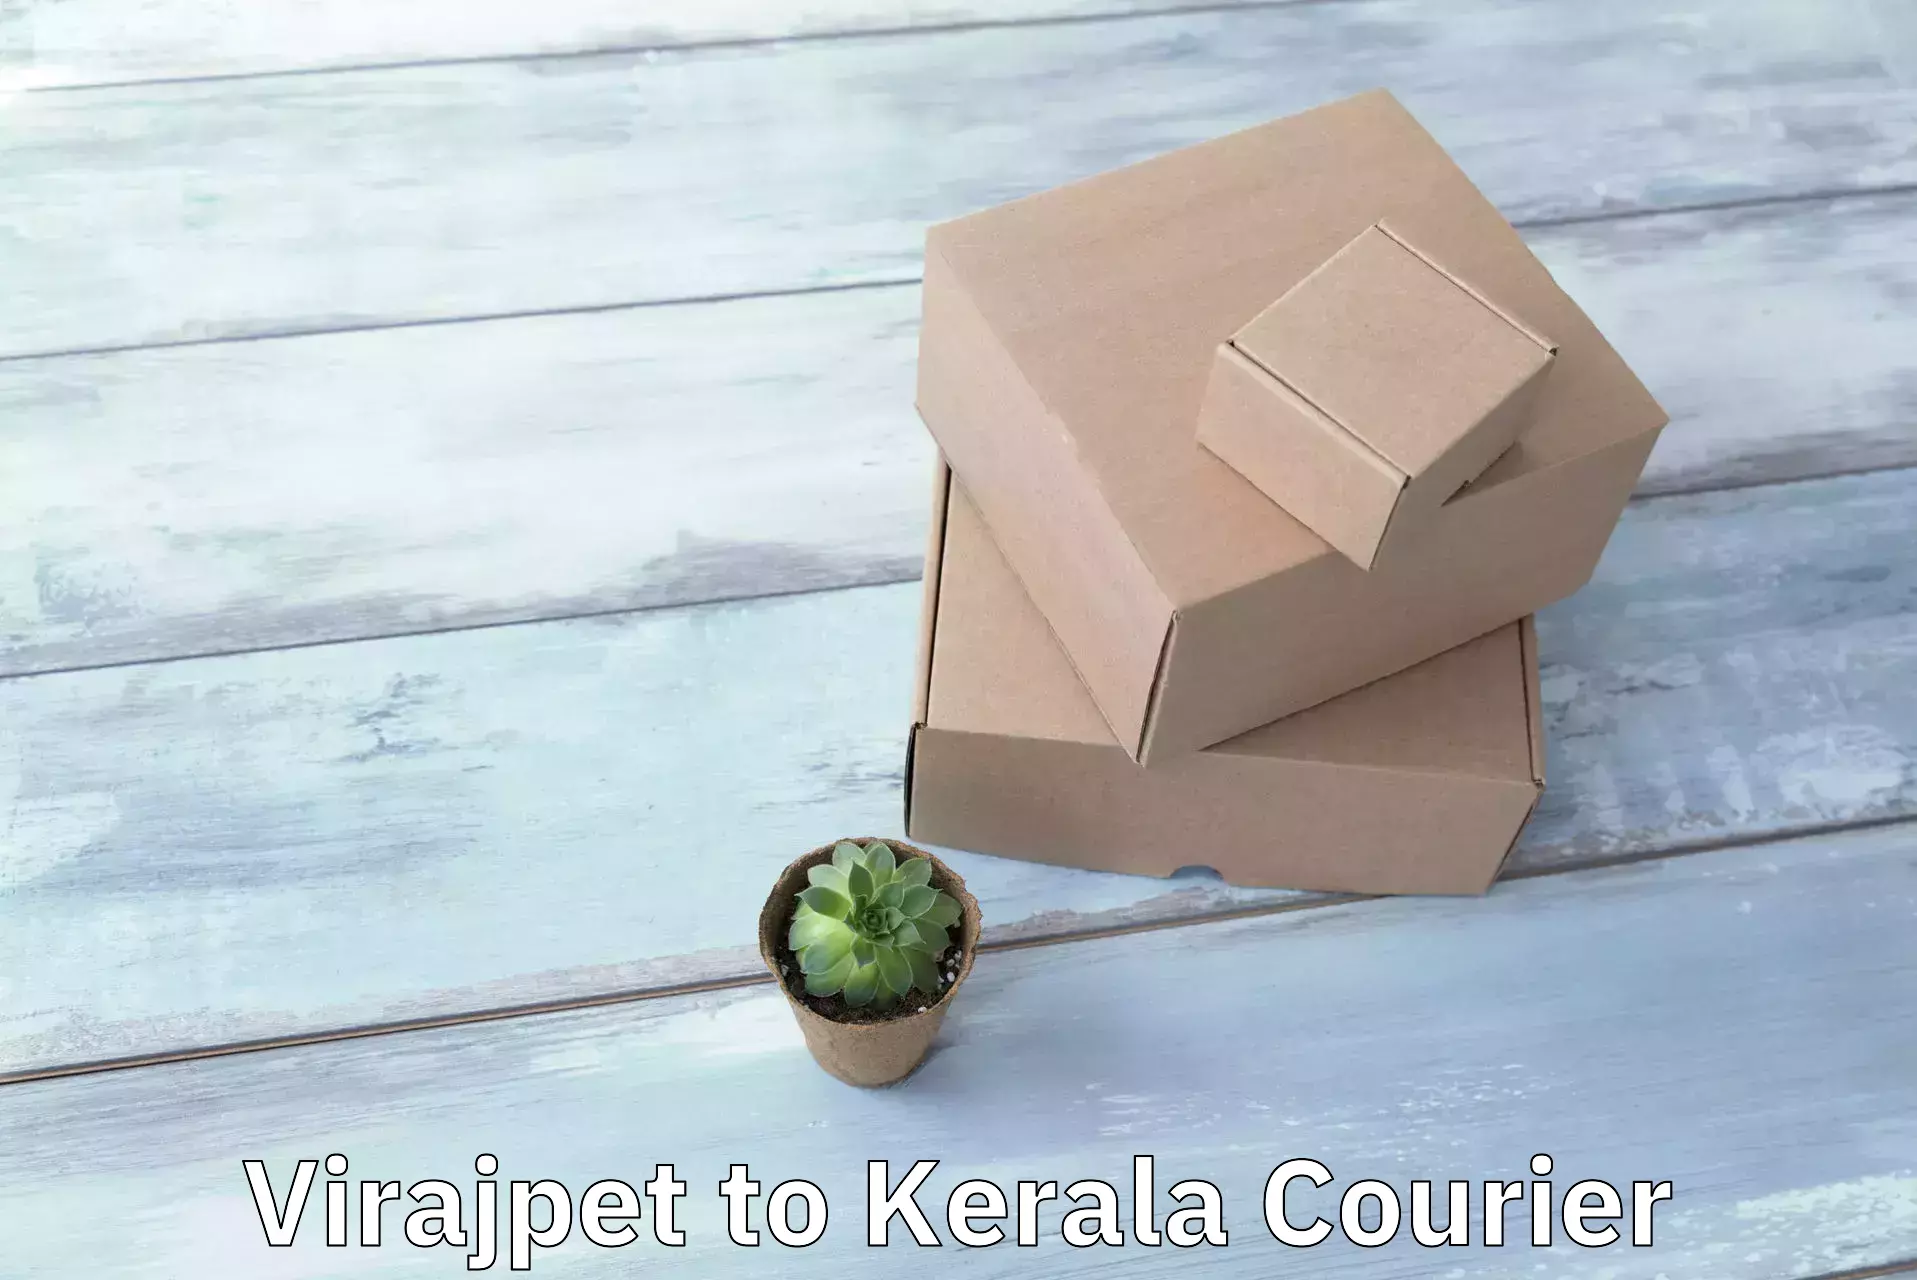 On-demand courier Virajpet to Kozhikode